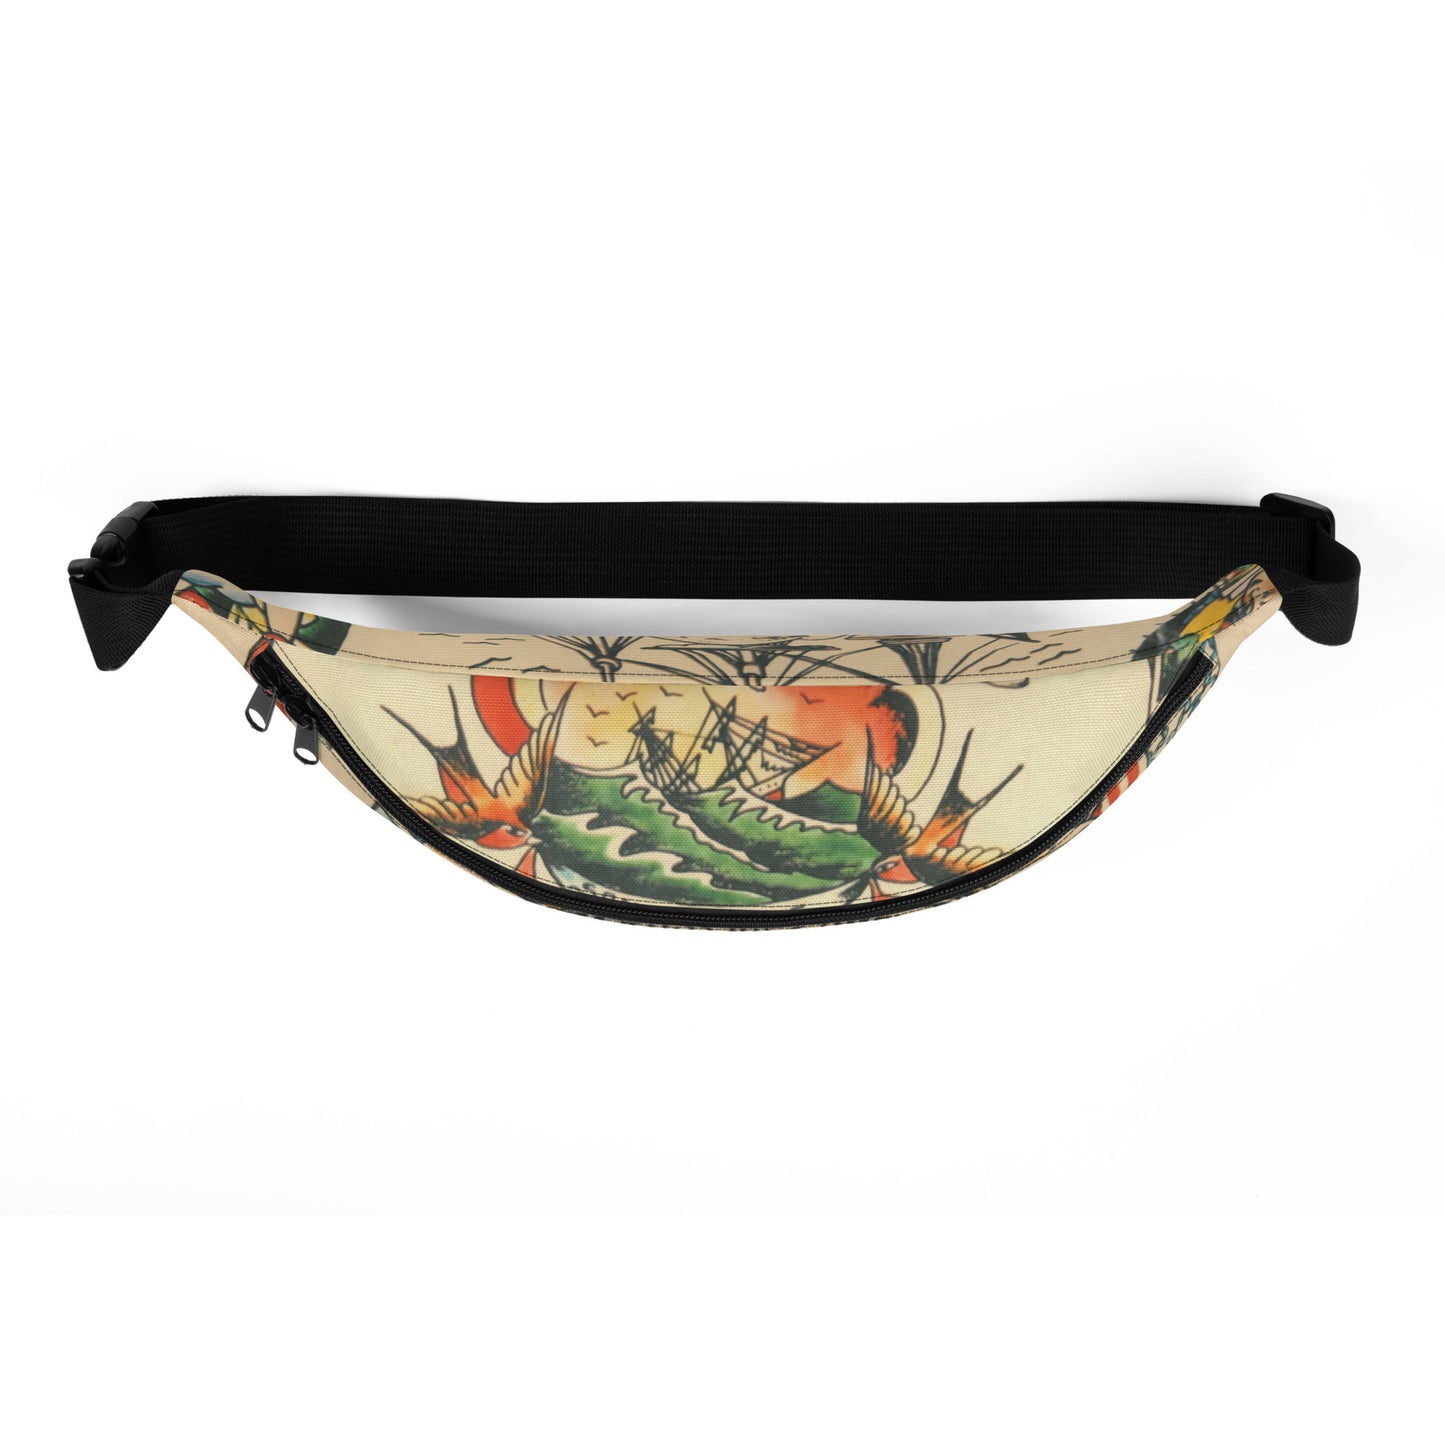 Fanny pack with unique ship design for safe keeping top